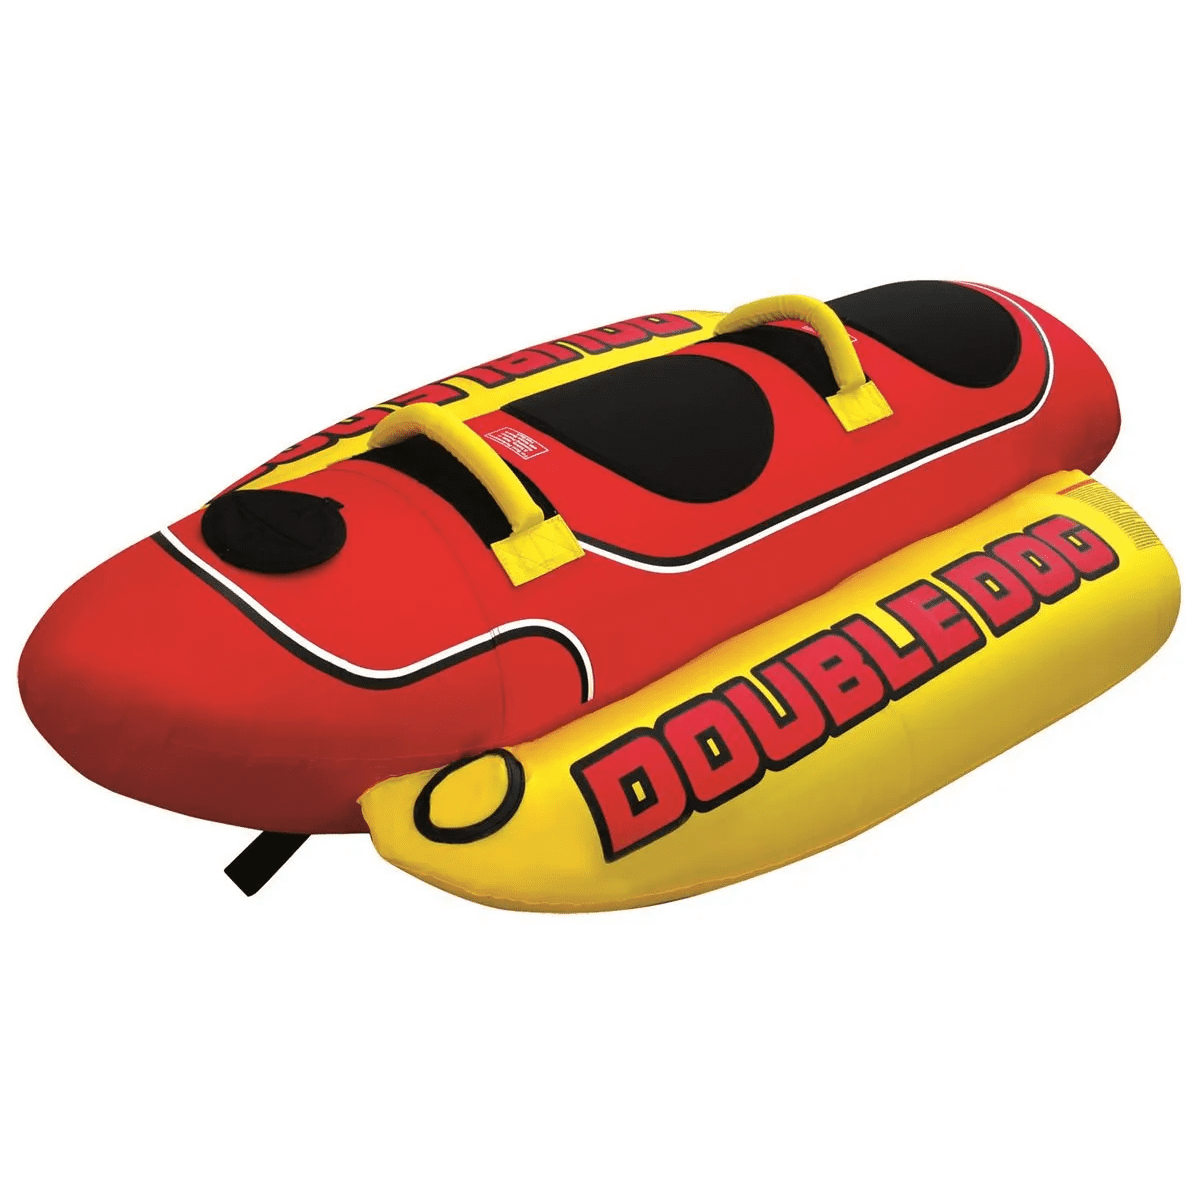 Airhead Double Dog HD-2 Inflatable Towable - Banana - 2 Person